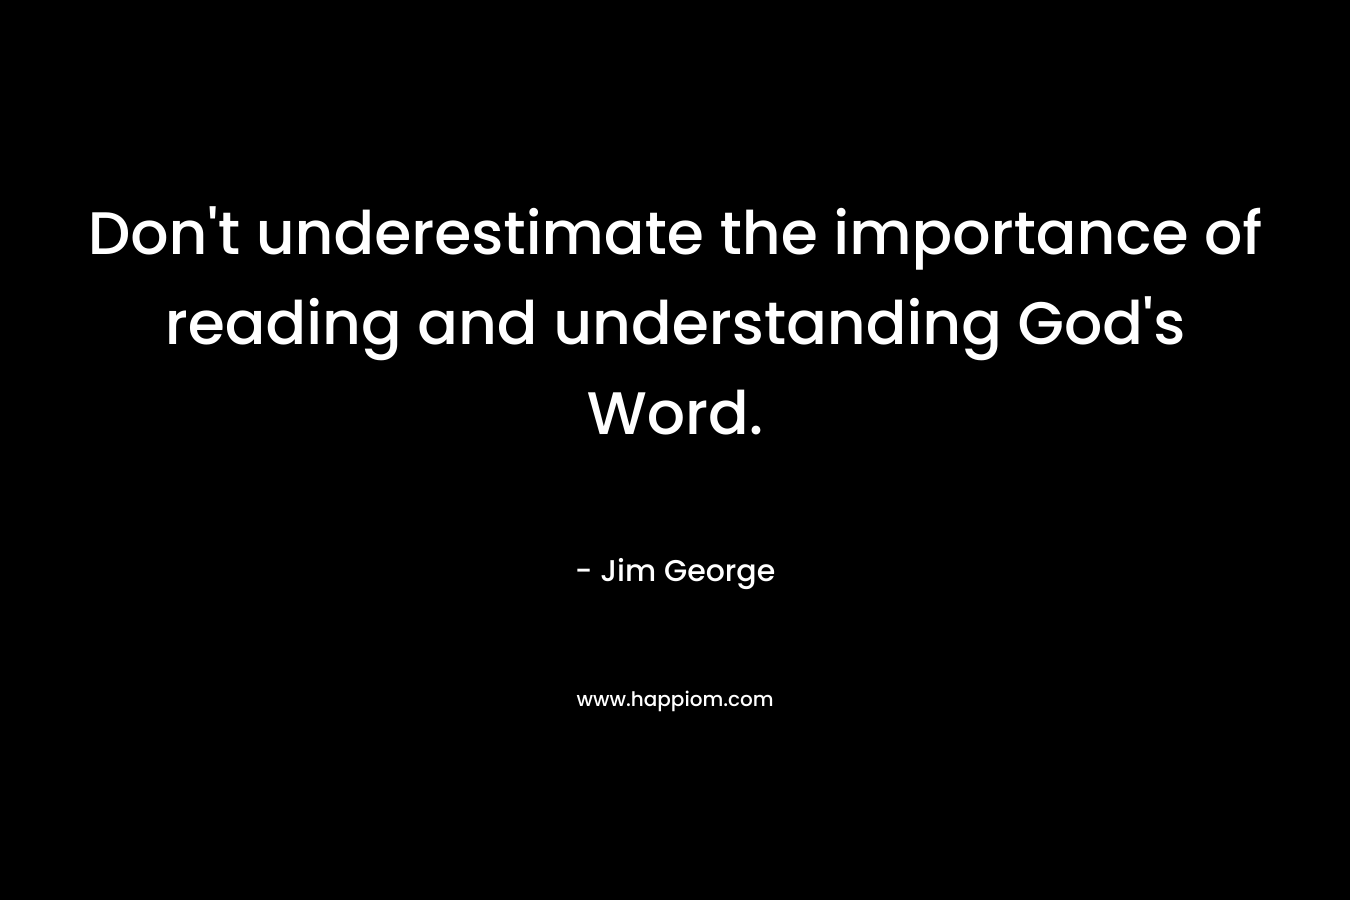 Don’t underestimate the importance of reading and understanding God’s Word. – Jim George